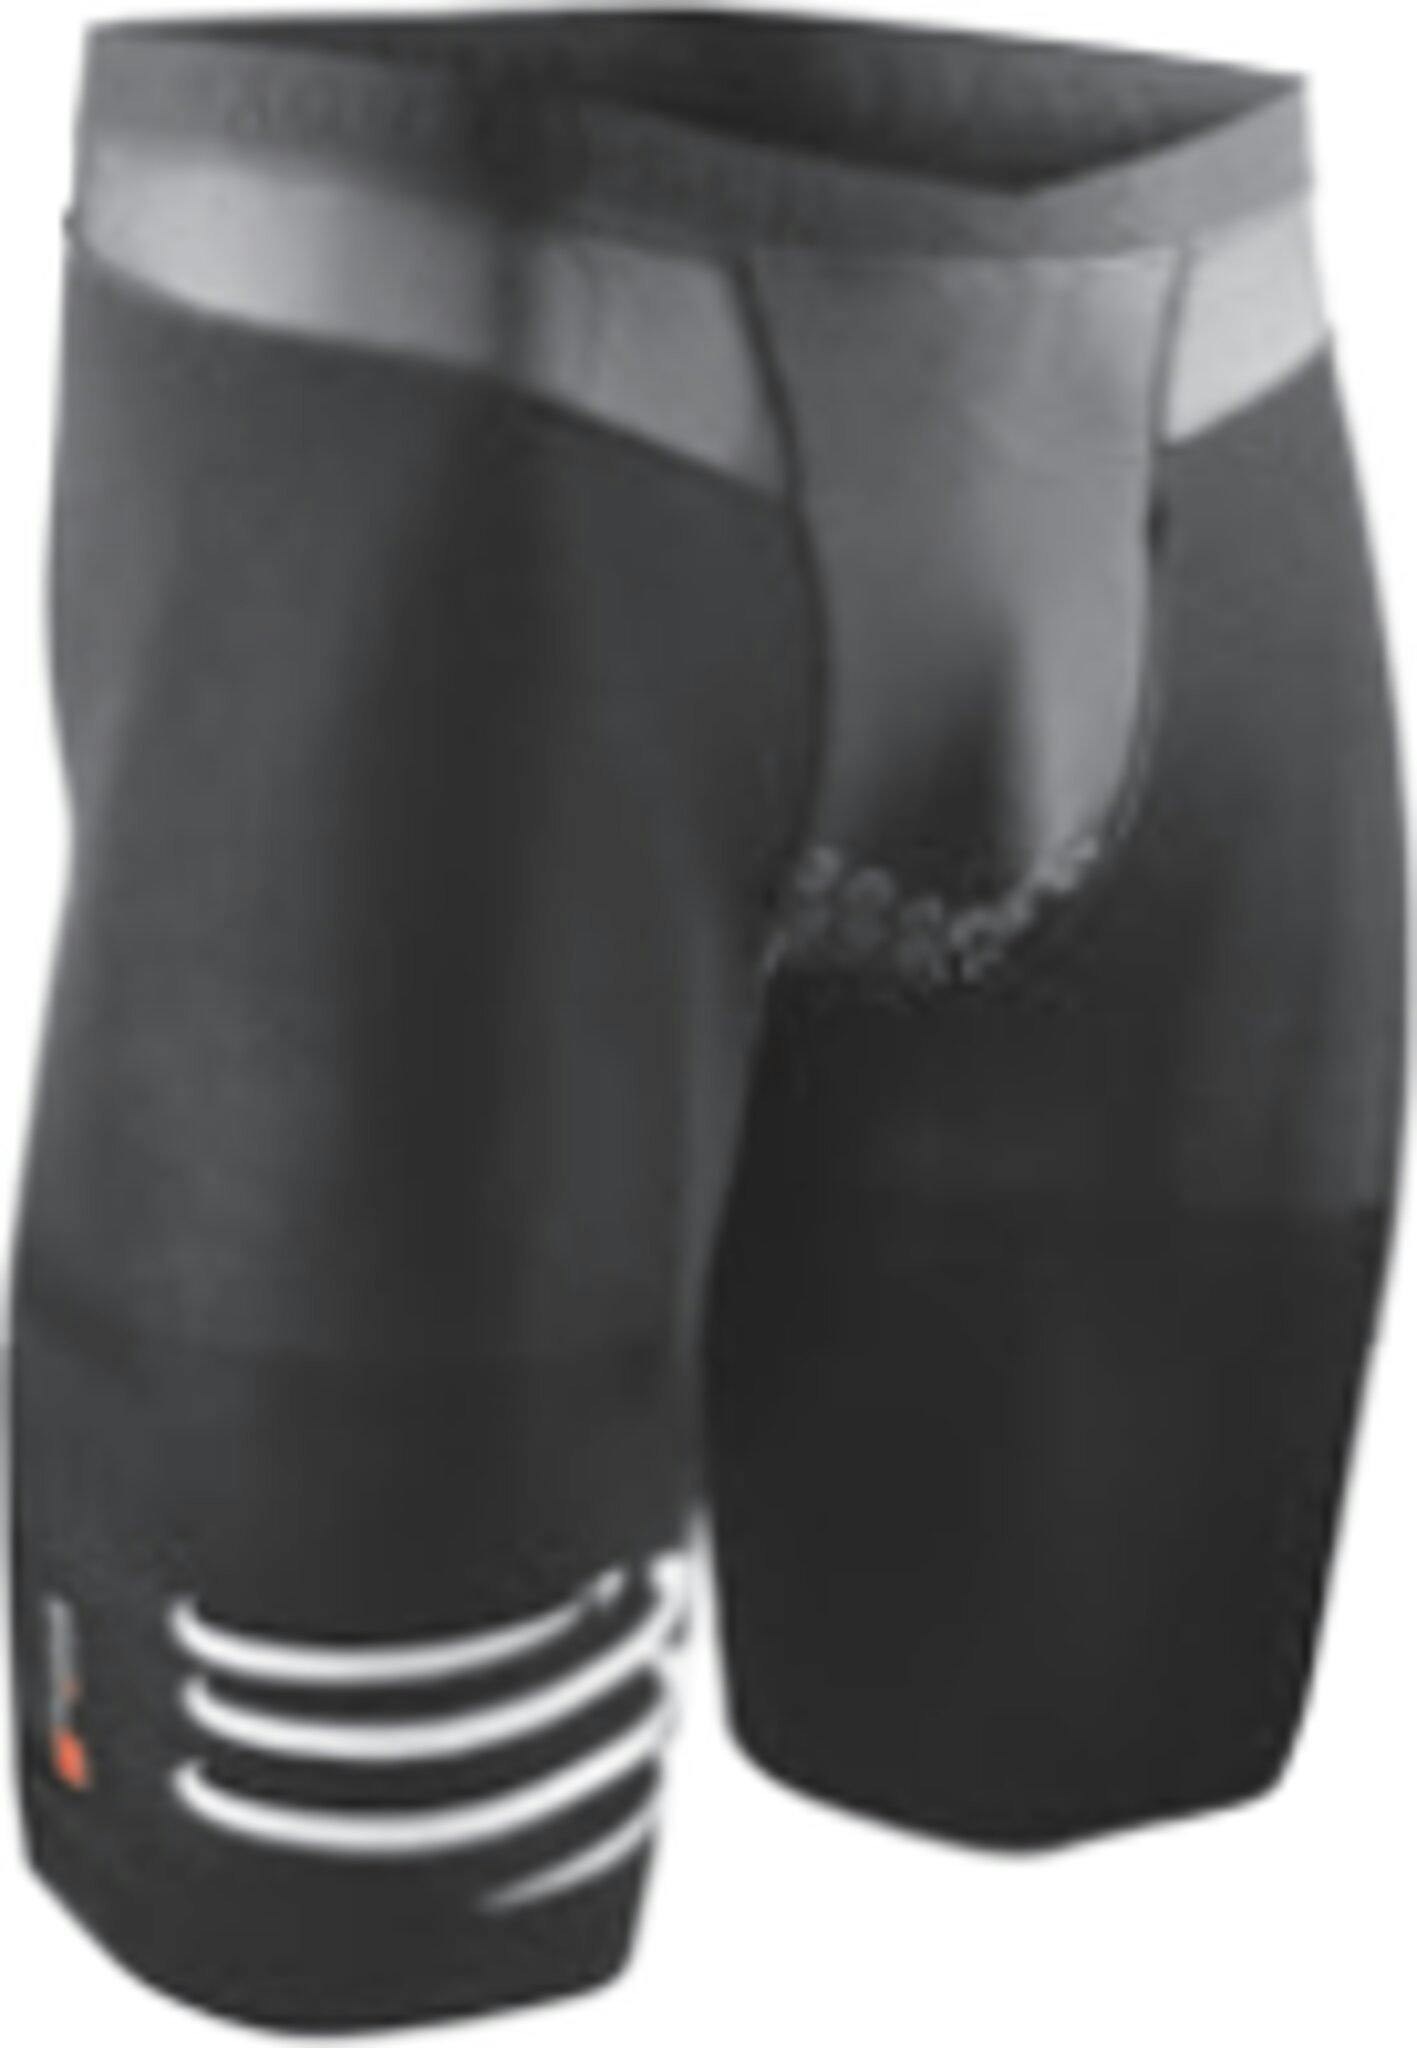 Product image for High Performance TR3 compression shorts V2 - Men's